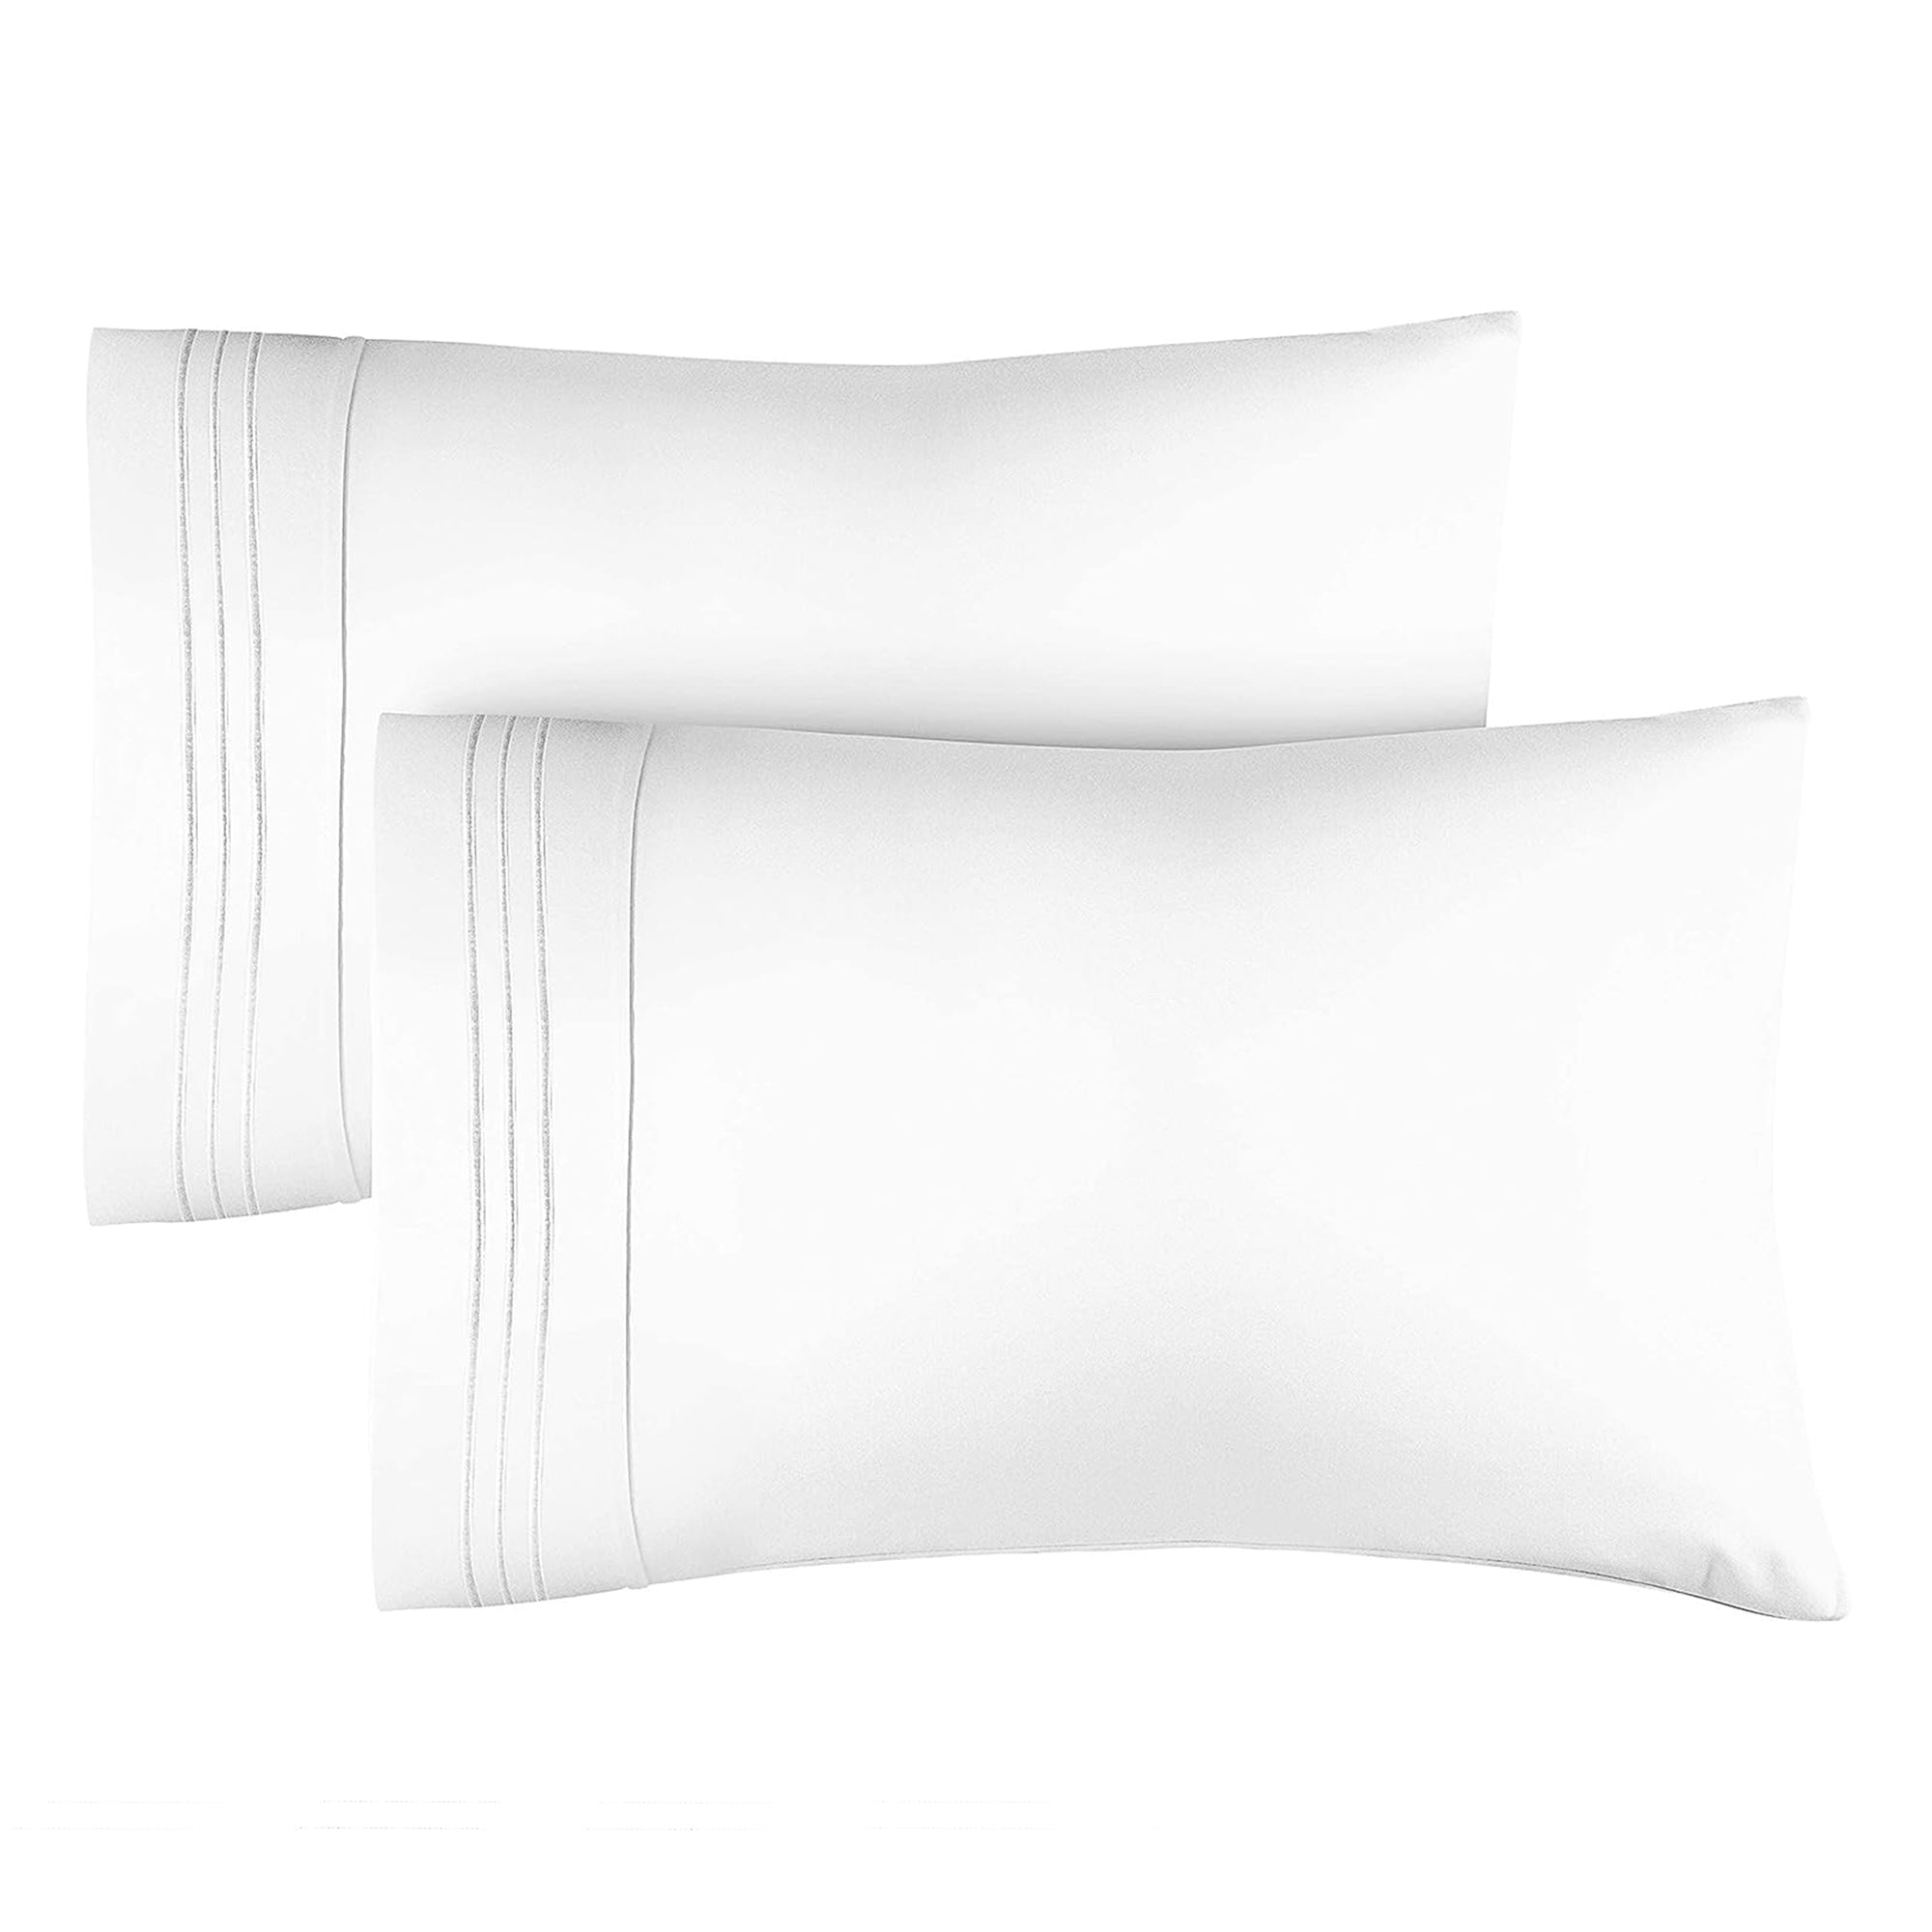 Two white pillowcases with embroidery.